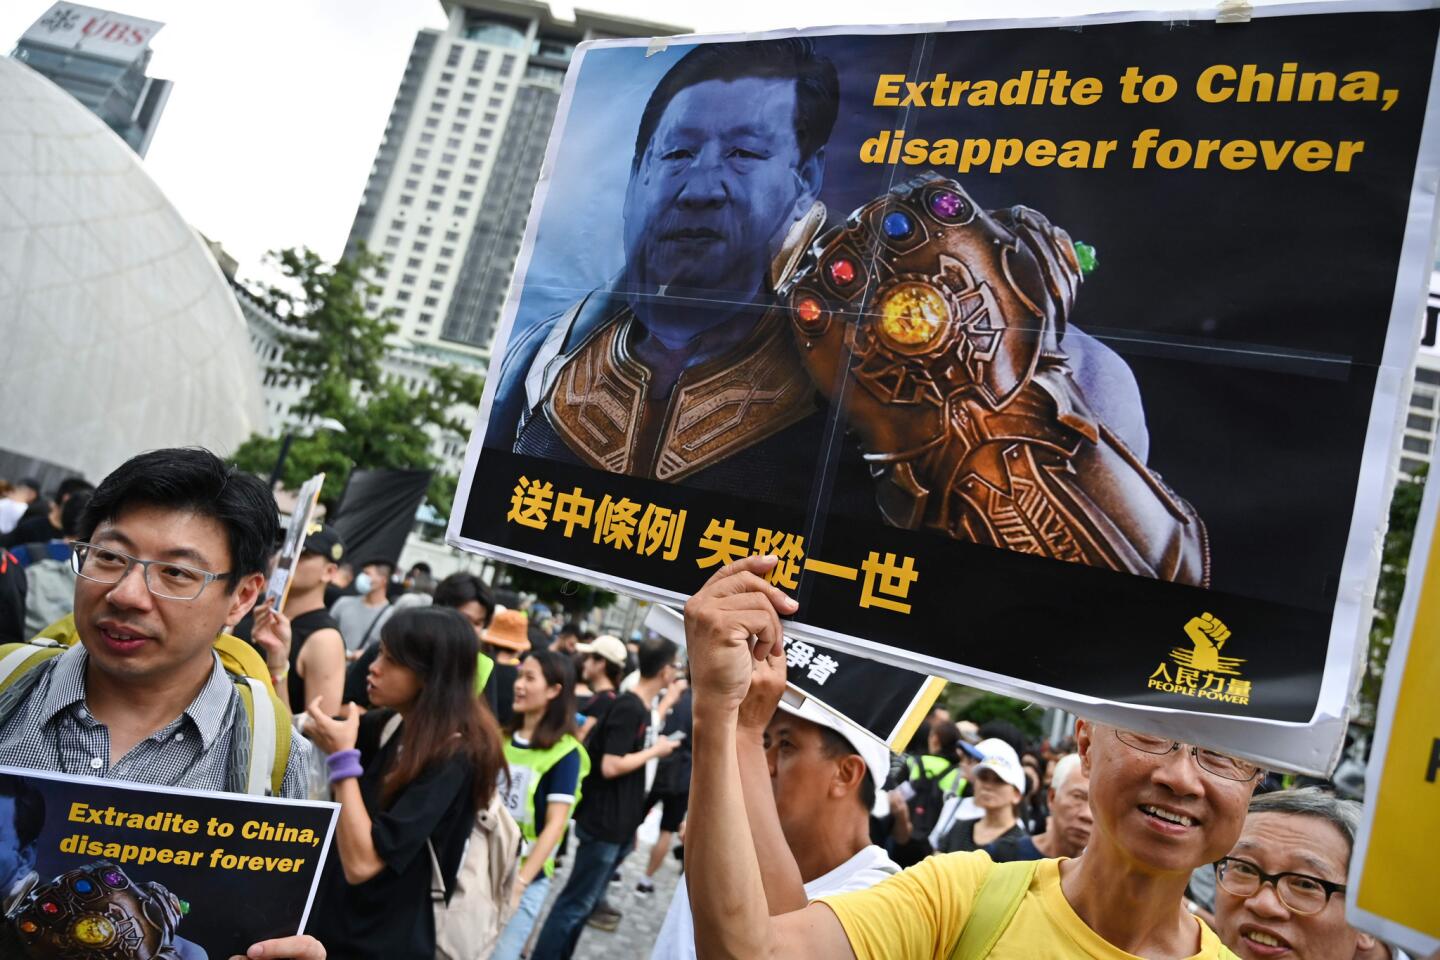 Protesters prepare to march to the West Kowloon station, where high-speed trains depart for the Chinese mainland.